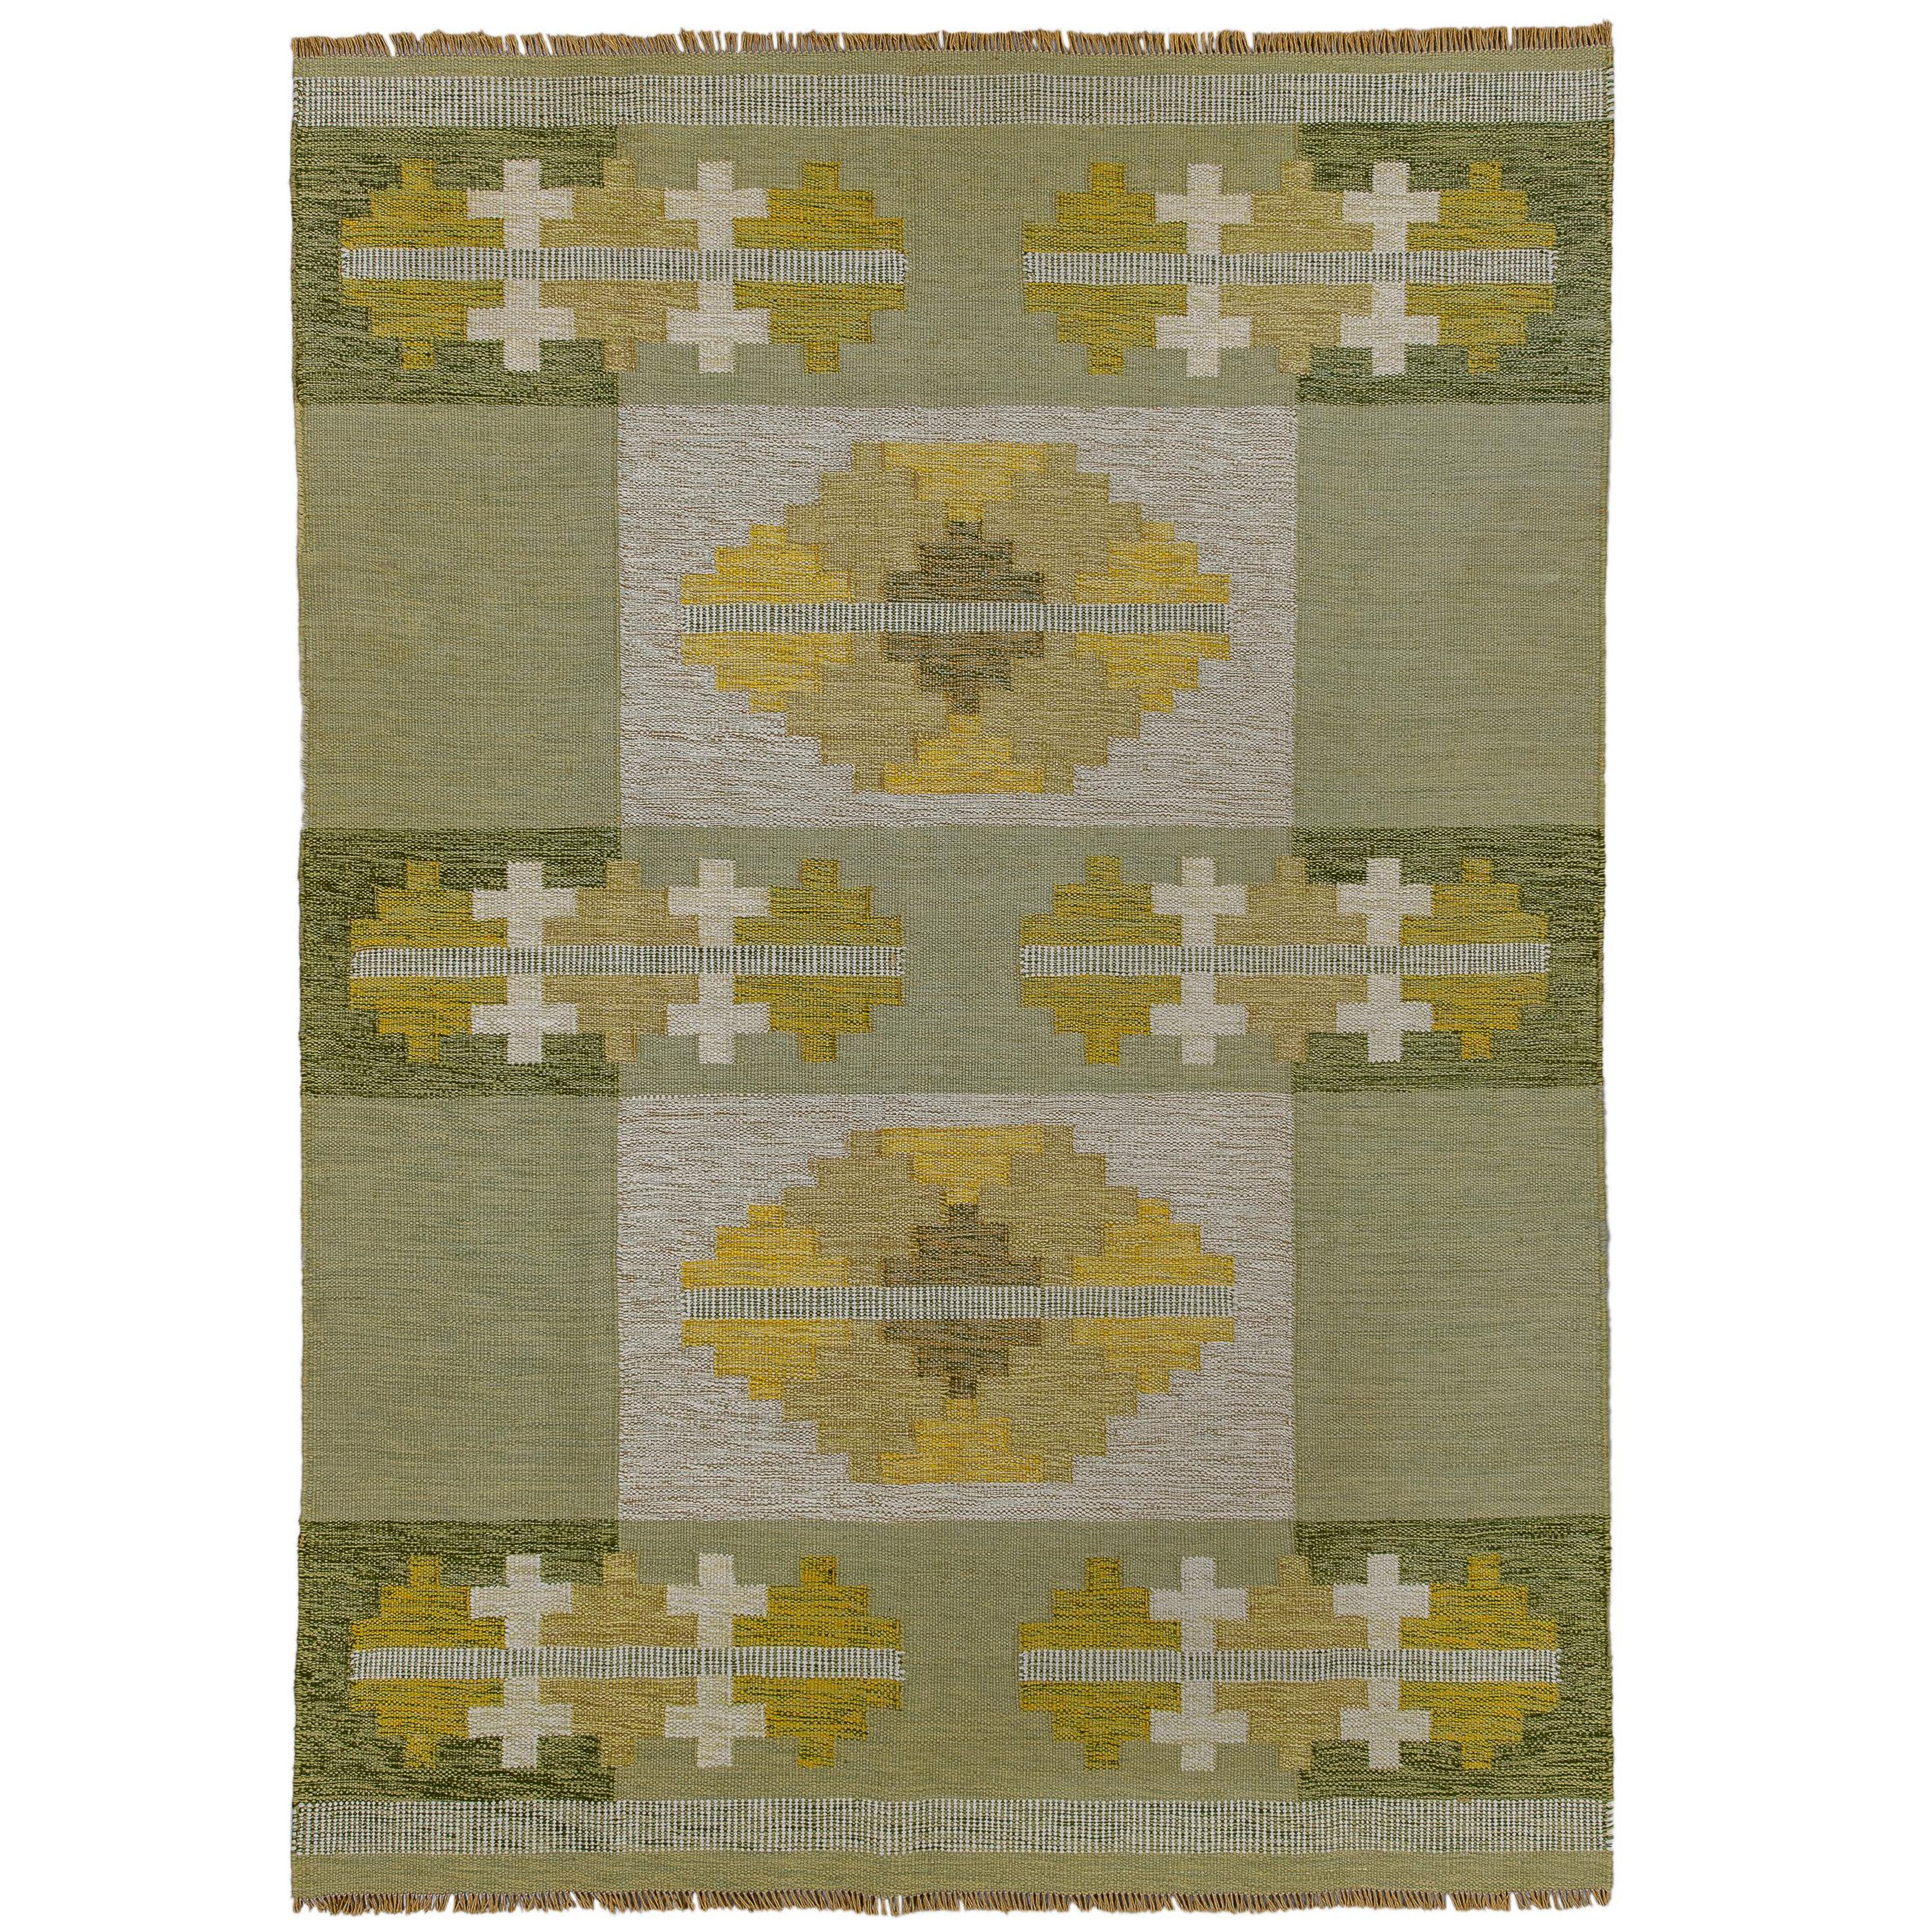 Eliko Rugs by David Ariel Vintage Swedish Rollakan Rug, Green/Yellow Palette For Sale